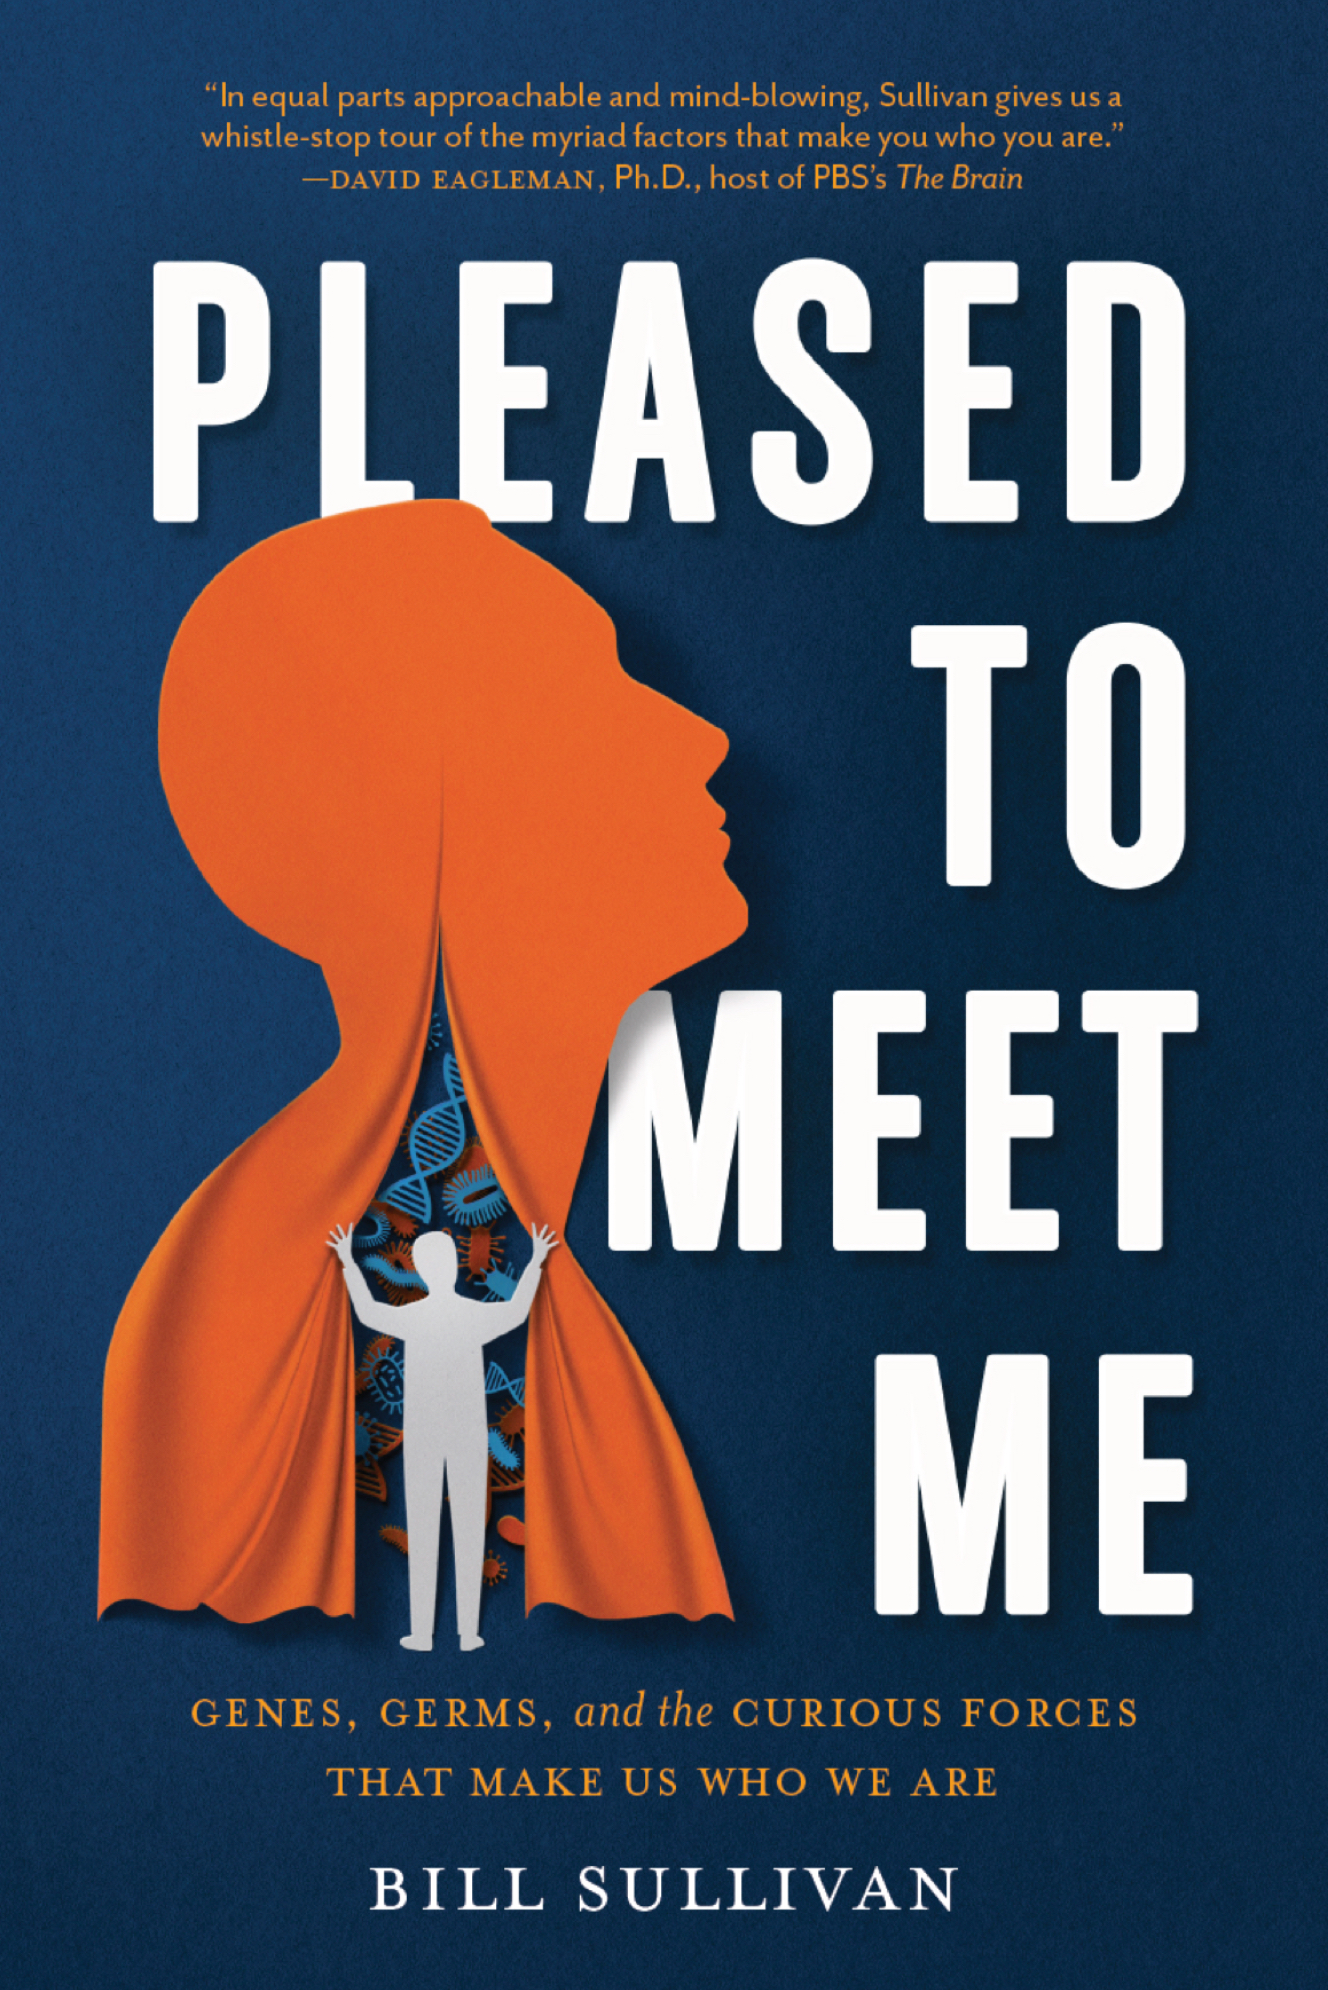 Pleased to Meet Me book cover art